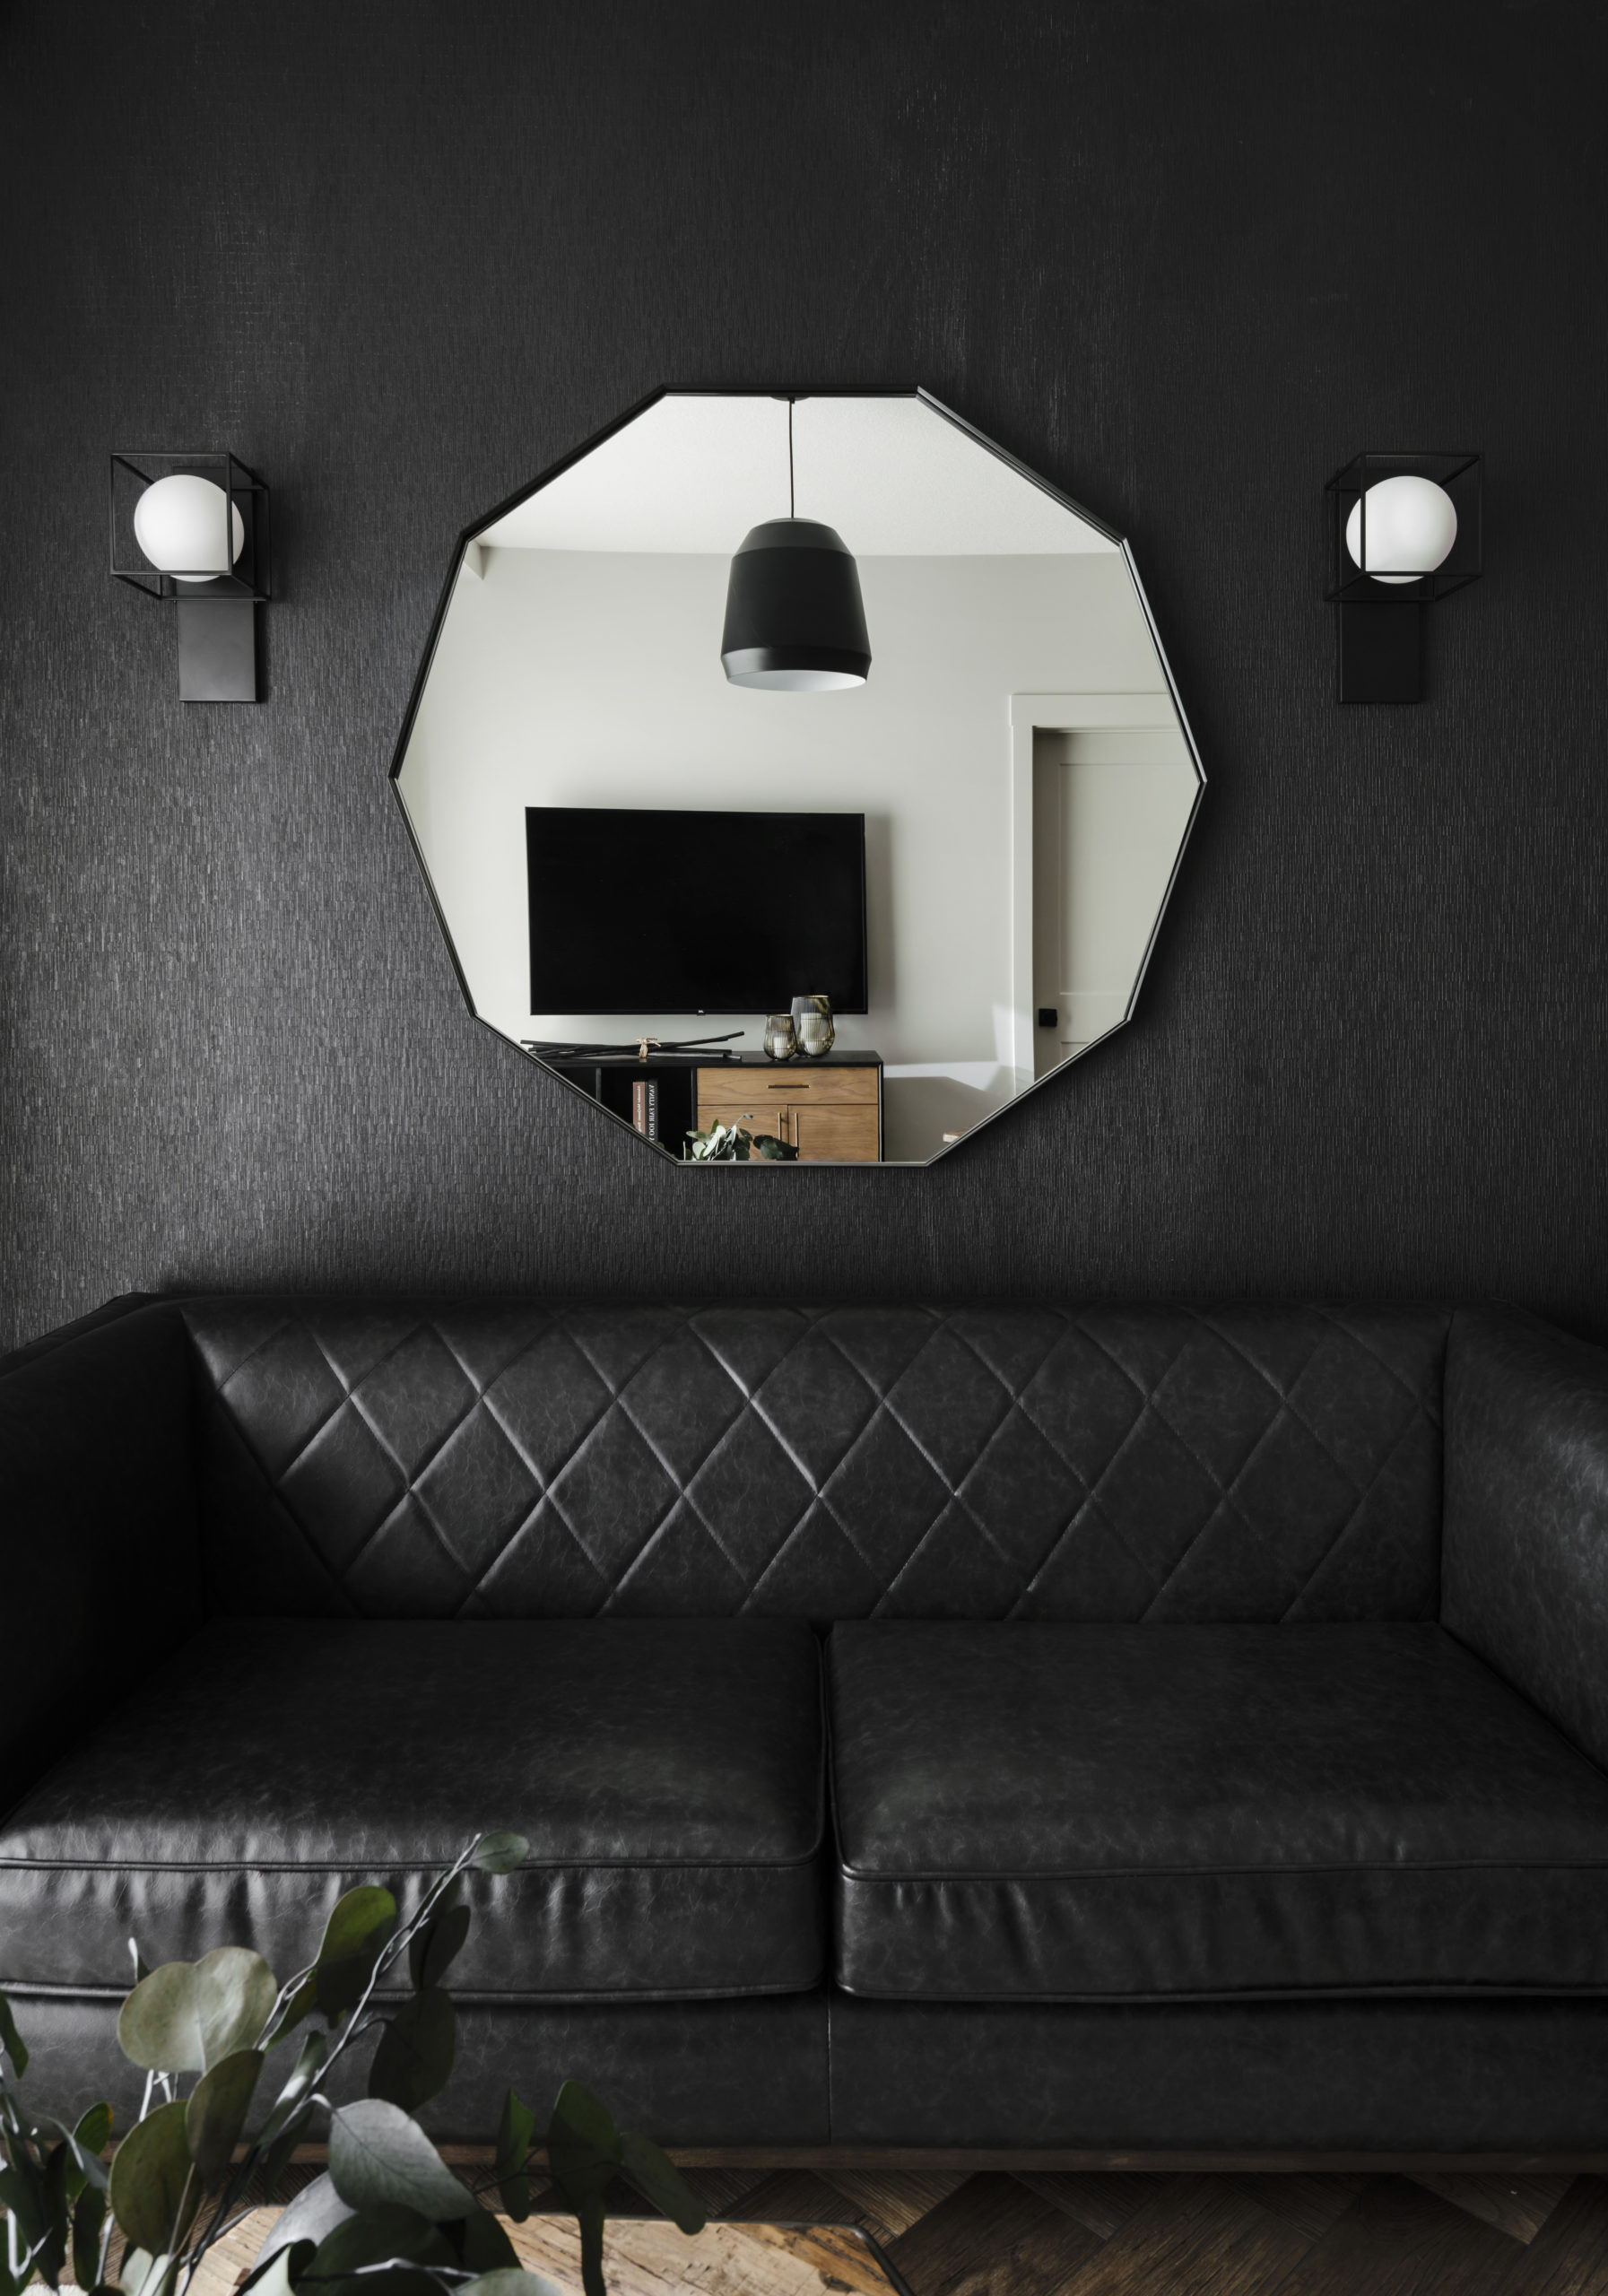 Black wallpaper with decagon mirror and wall sconces